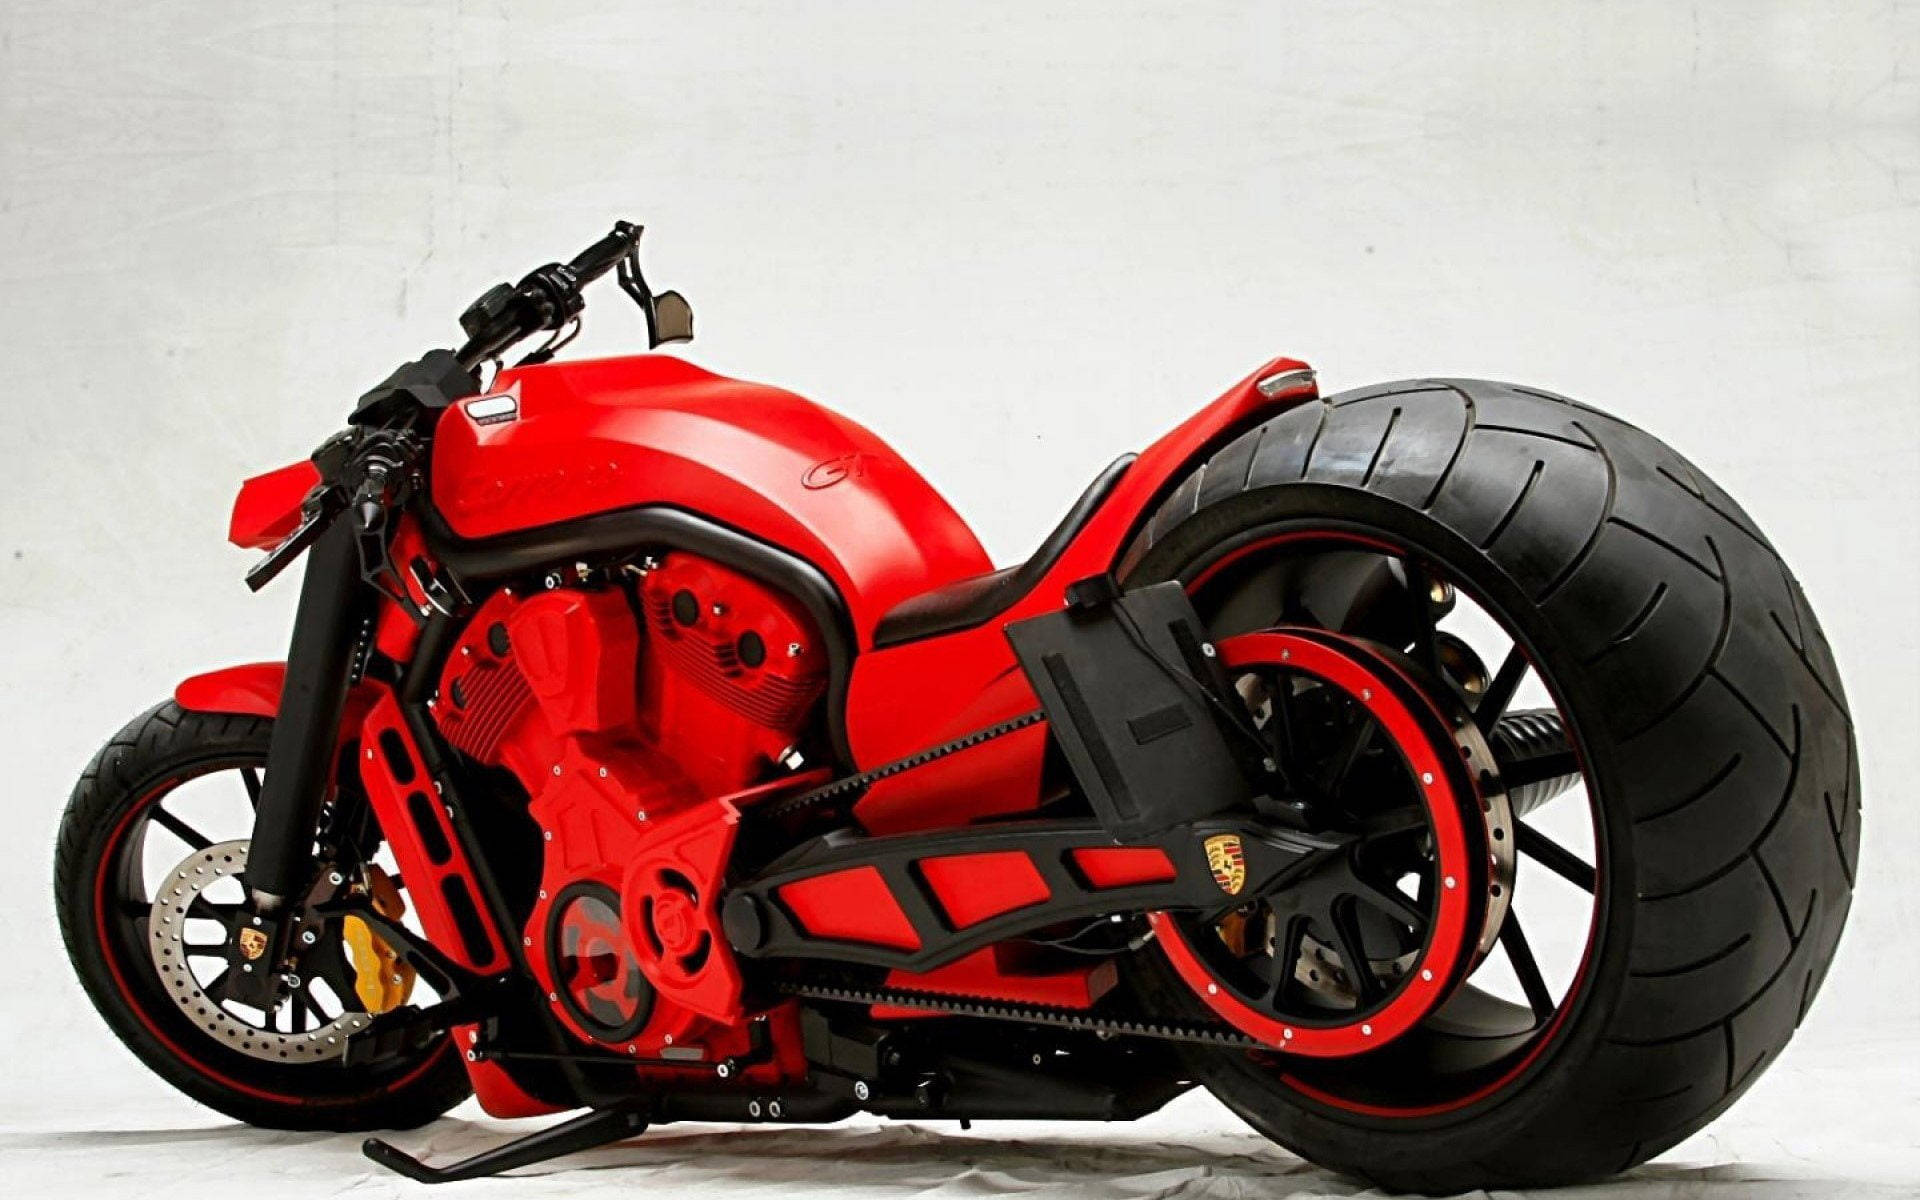 Tuned-up Bobber Motorcycle